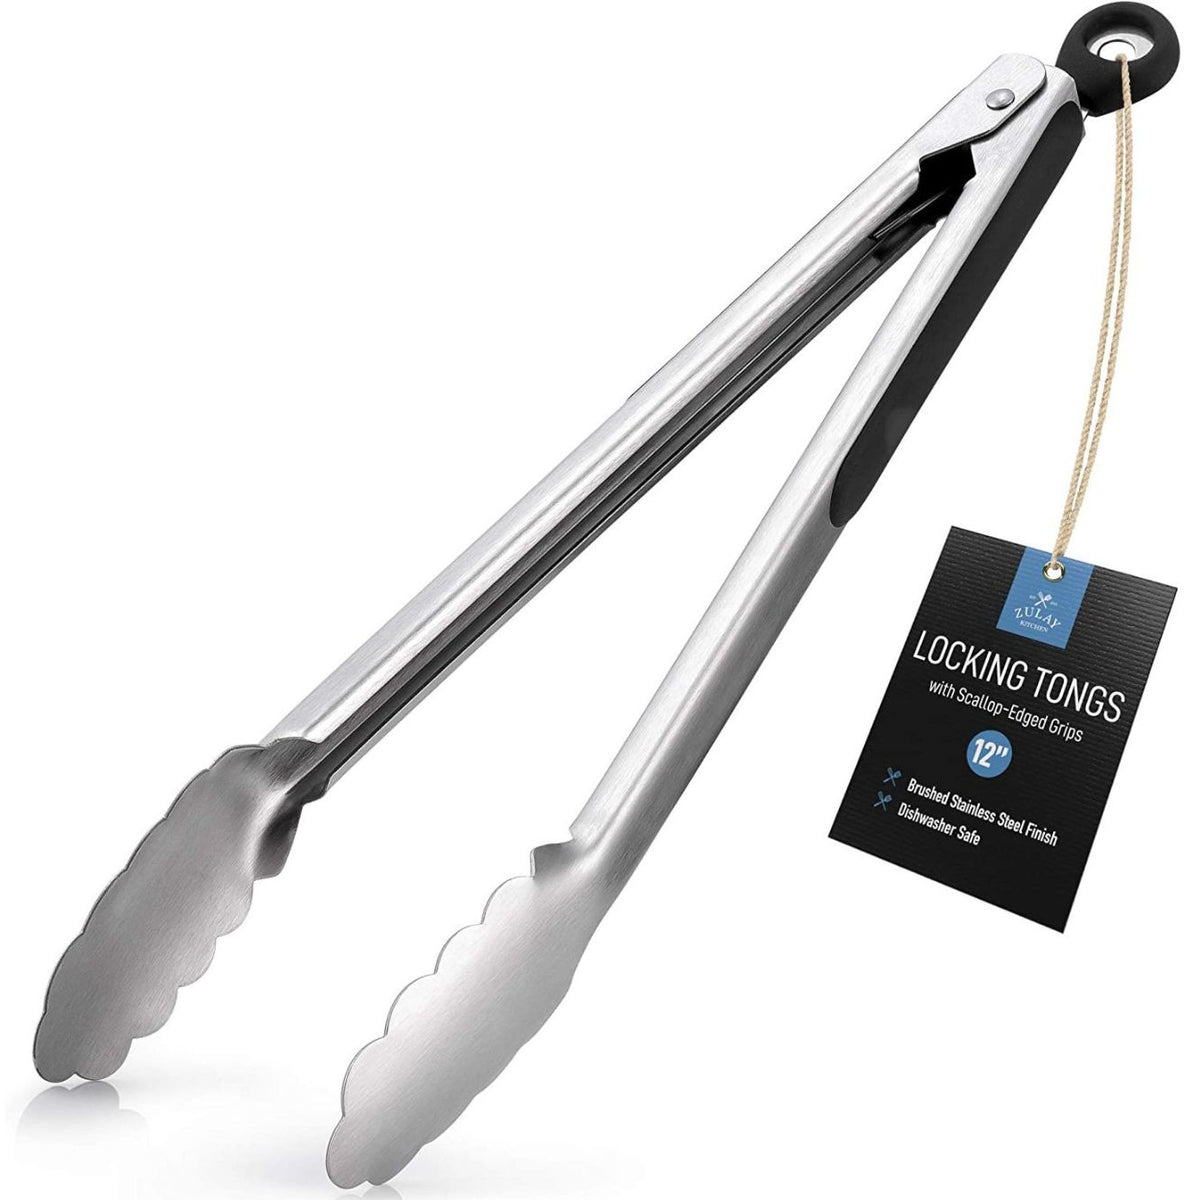 Zulay Kitchen - Premium Set of Stainless Steel Tongs for Cooking, Grilling and Barbecue